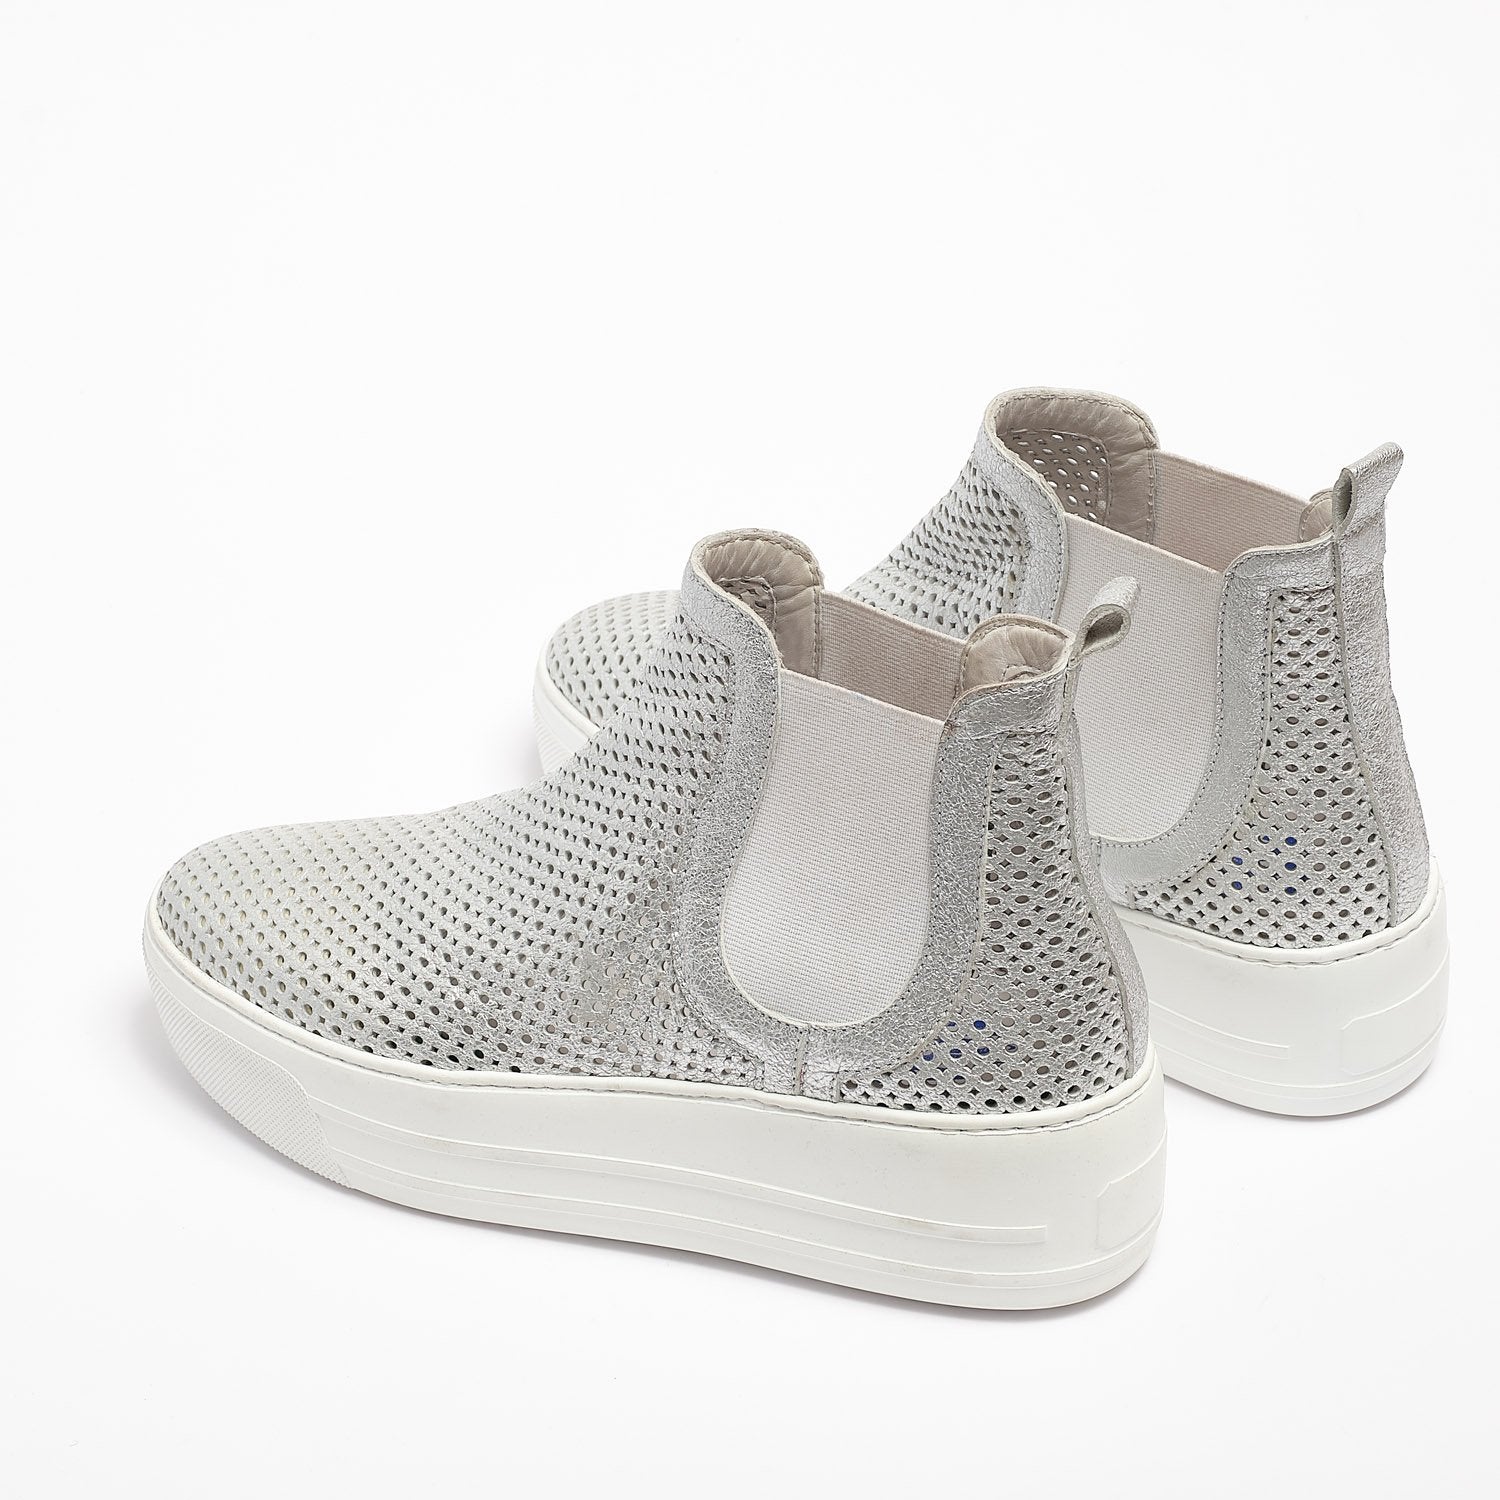 Mizu Elastic Mid Shoes soft perforated leather silver